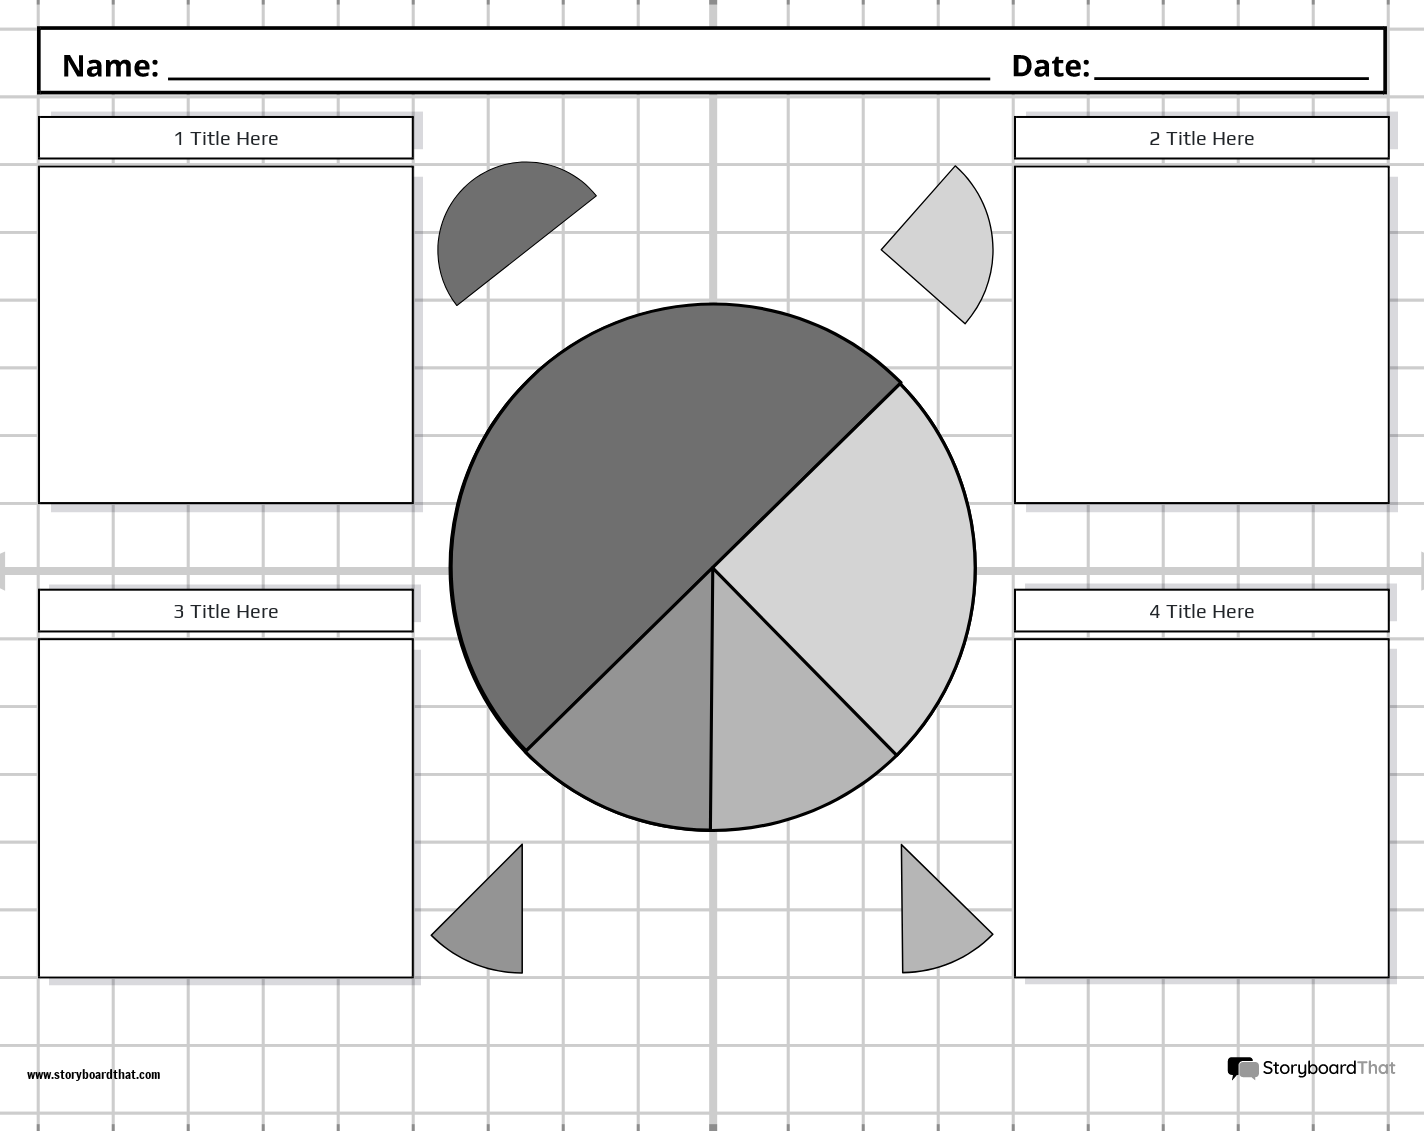 Pie Chart Worksheet Template with 4 Text Boxes